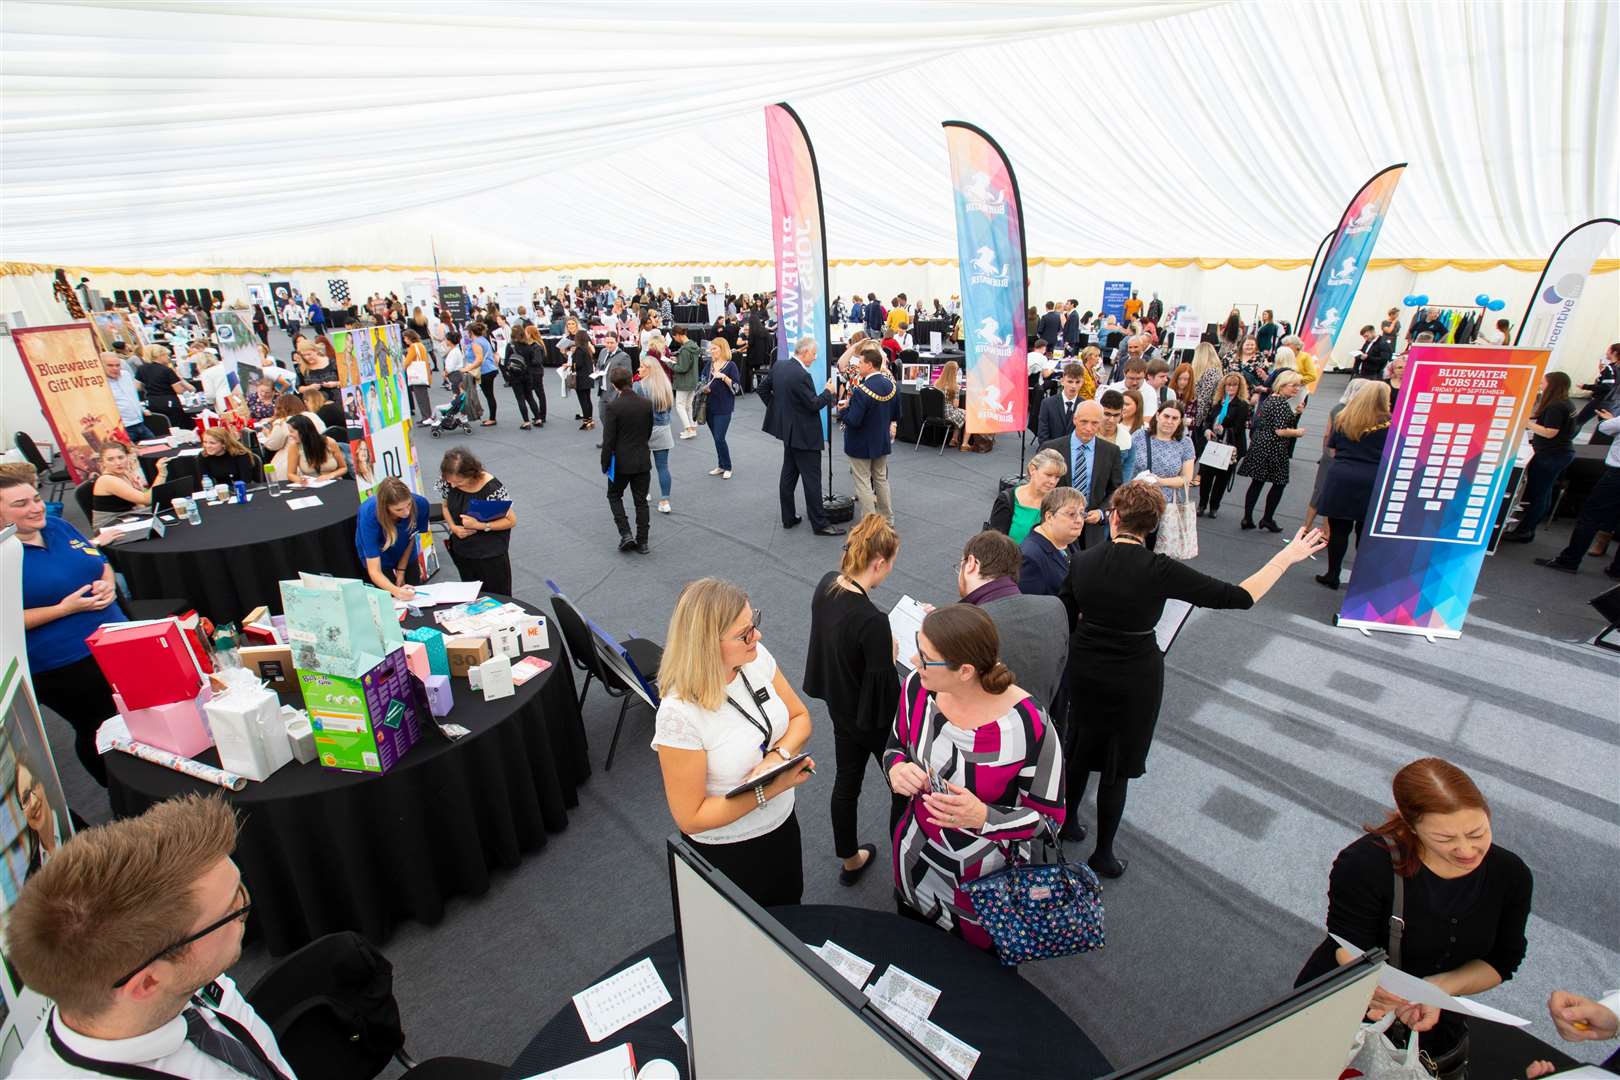 2000 job seekers attended the two-day event inside Bluewater Shopping Centre (16786882)